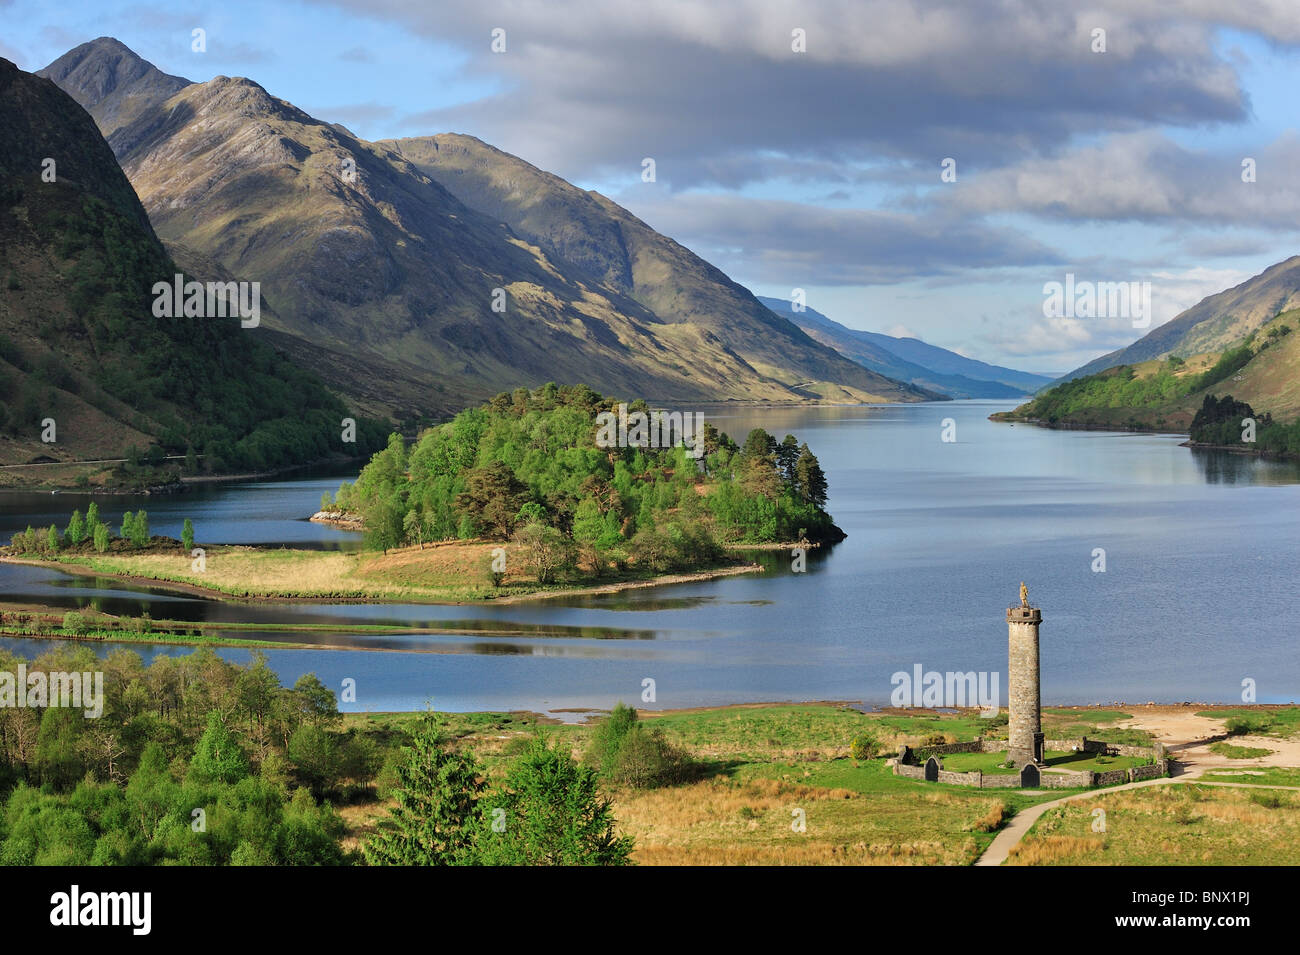 The Glenfinnan Monument on the shores of Loch Shiel, erected in 1815, Lochaber, Highlands, Scotland, UK Stock Photo